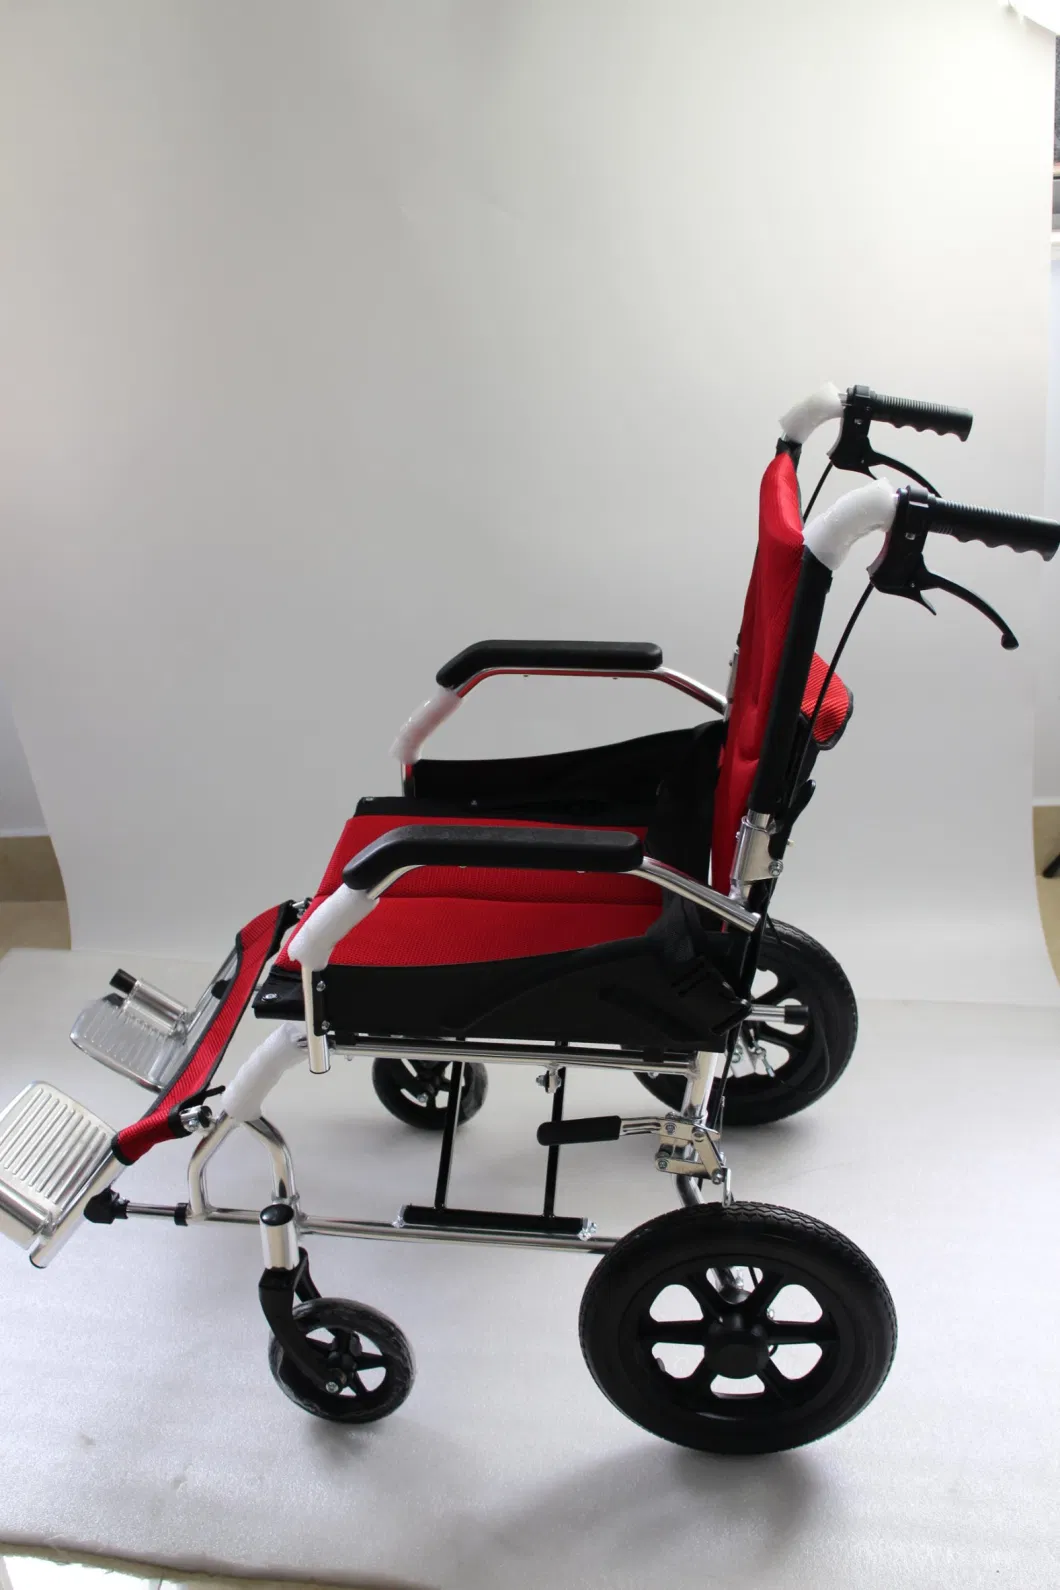 Tricycle Cargo Bike Motorized Tricycles Bike Tricycle for Elderly Handicapped